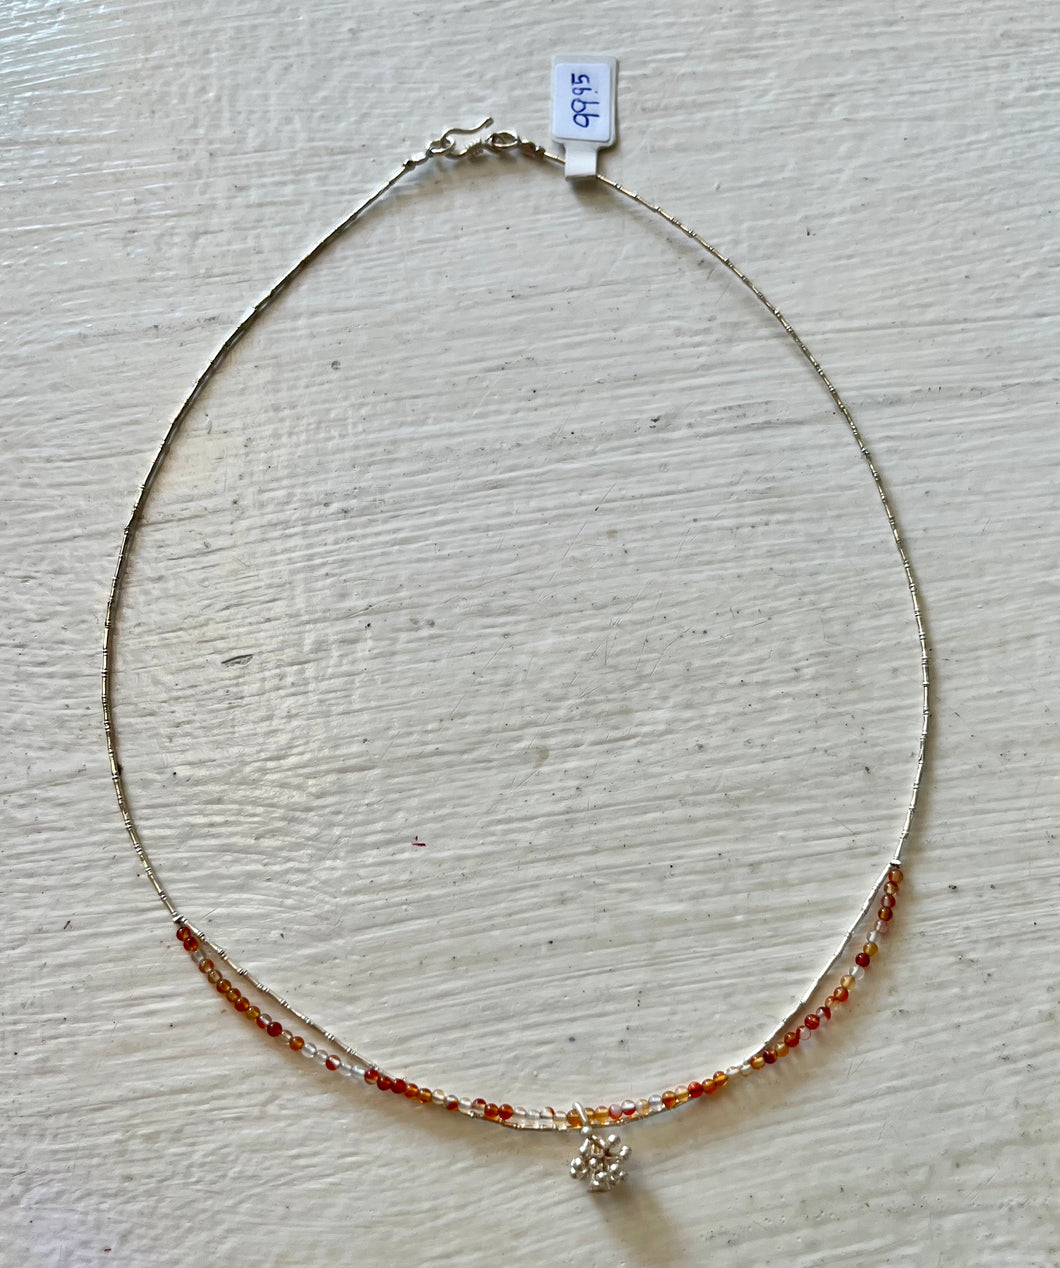 Silver Carnelian Necklace - Handcrafted Karen Tribe Thailand